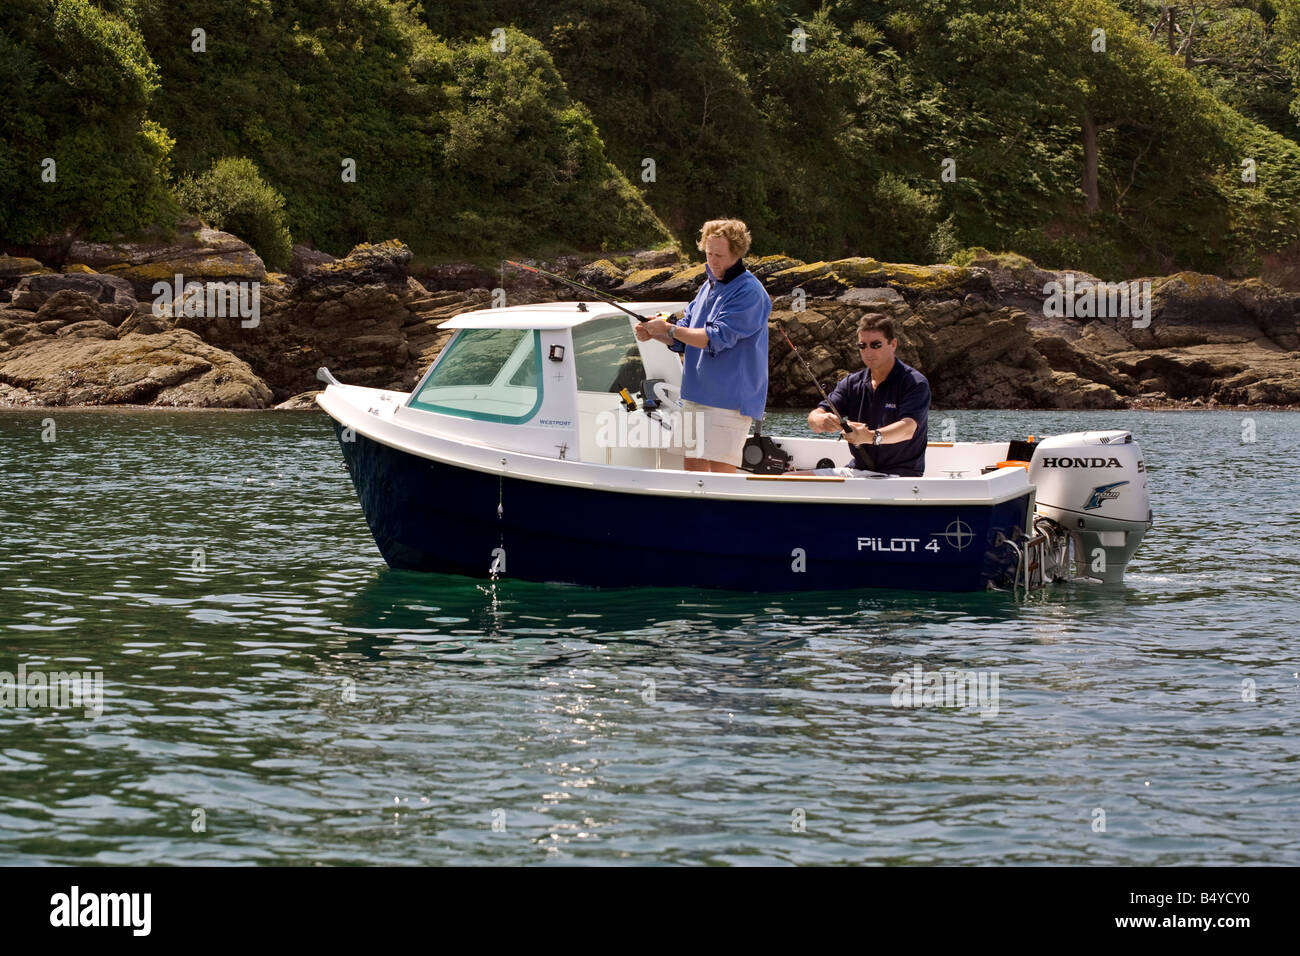 Page 11 - Motors Boats High Resolution Stock Photography and Images - Alamy